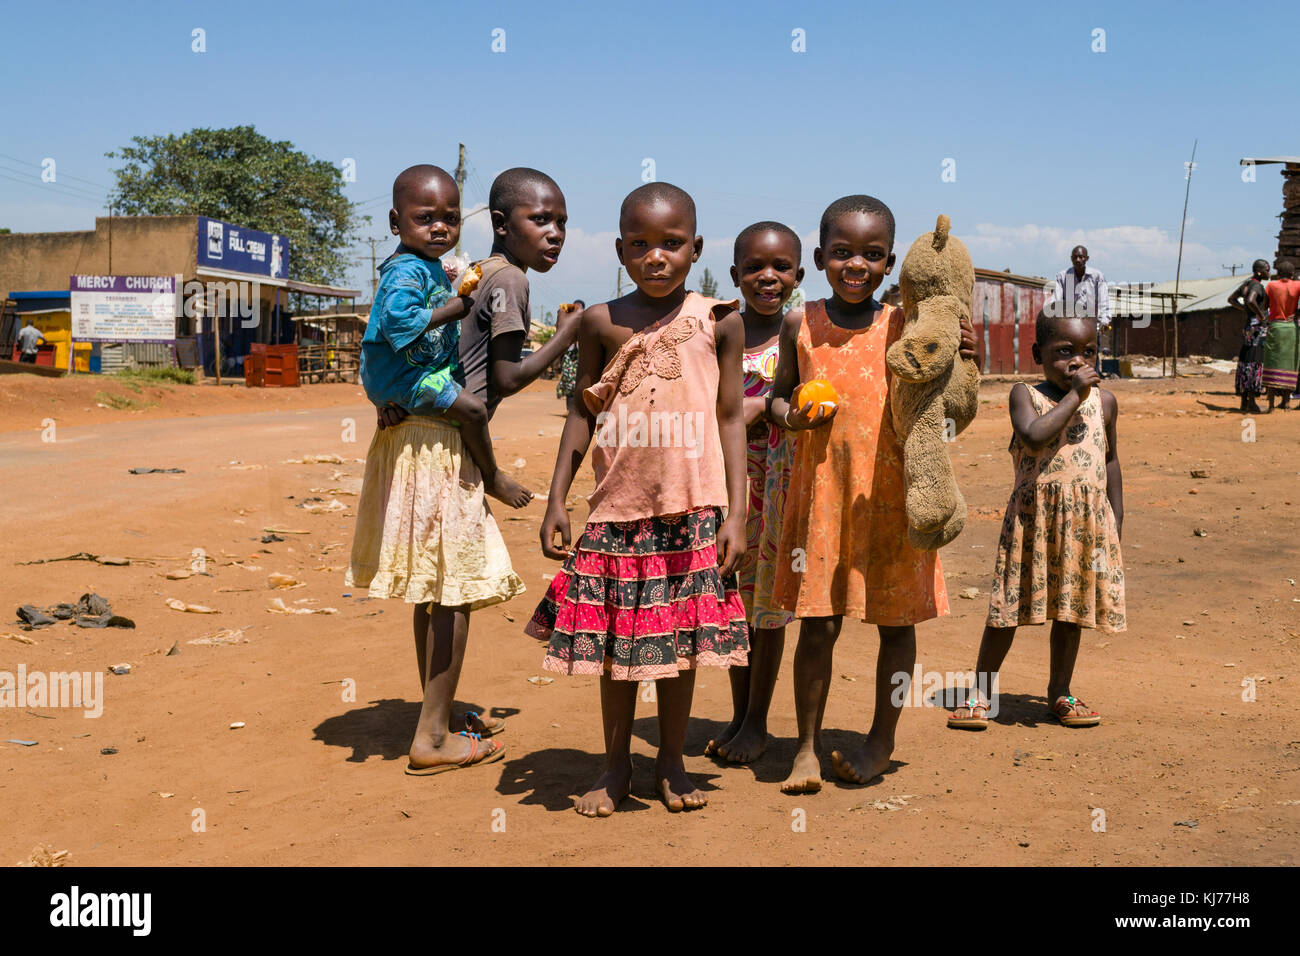 A group of young Ugandan children stand by the road posing for a photograph, Busia, Uganda, East Africa Stock Photo